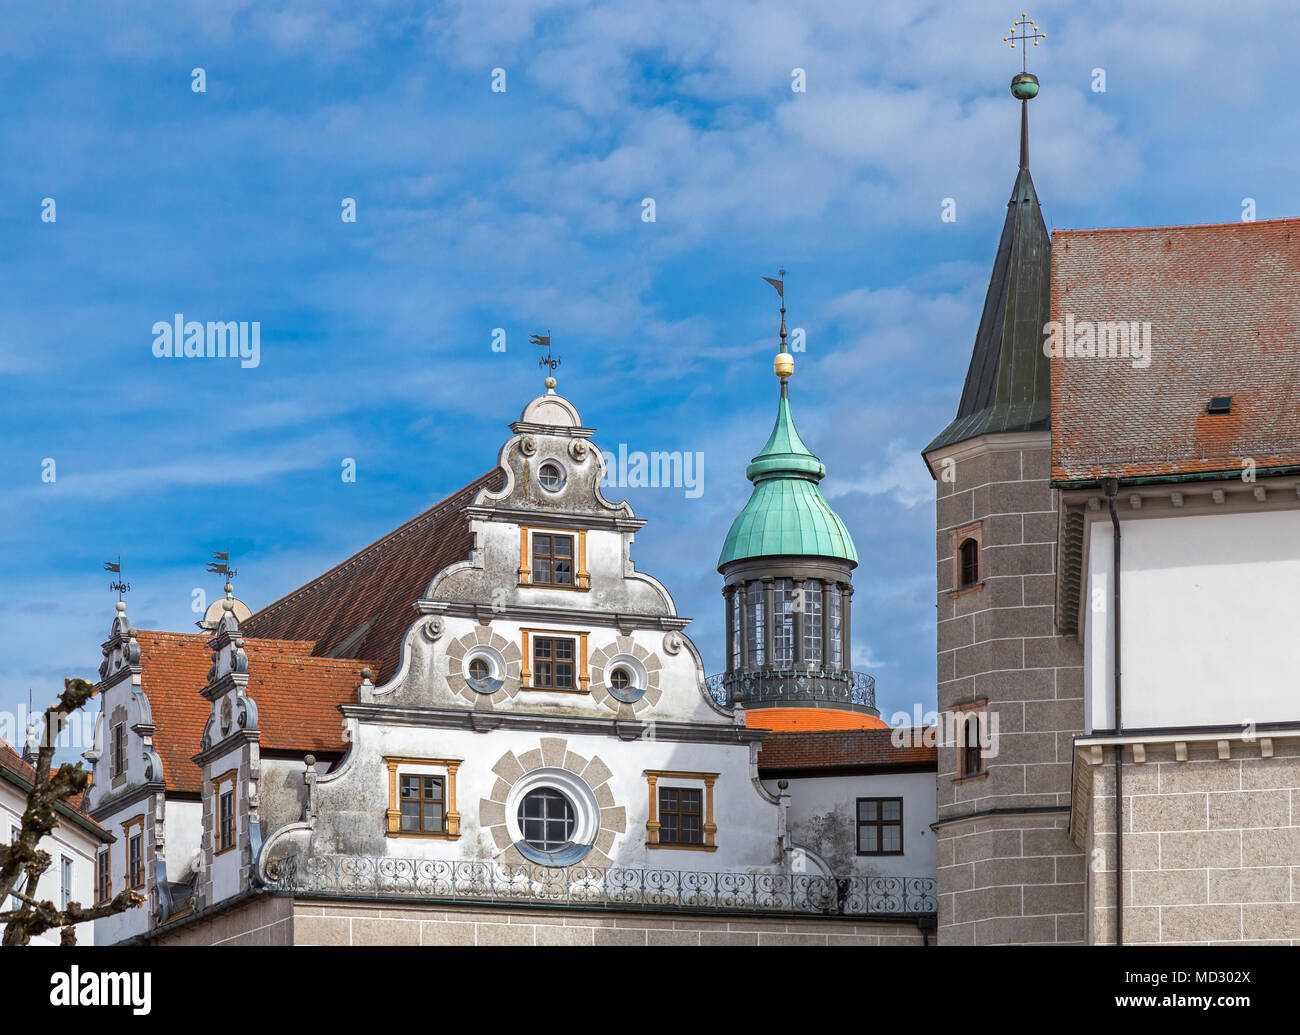 Tower and facade of Neuburg castle, Germany Stock Photo